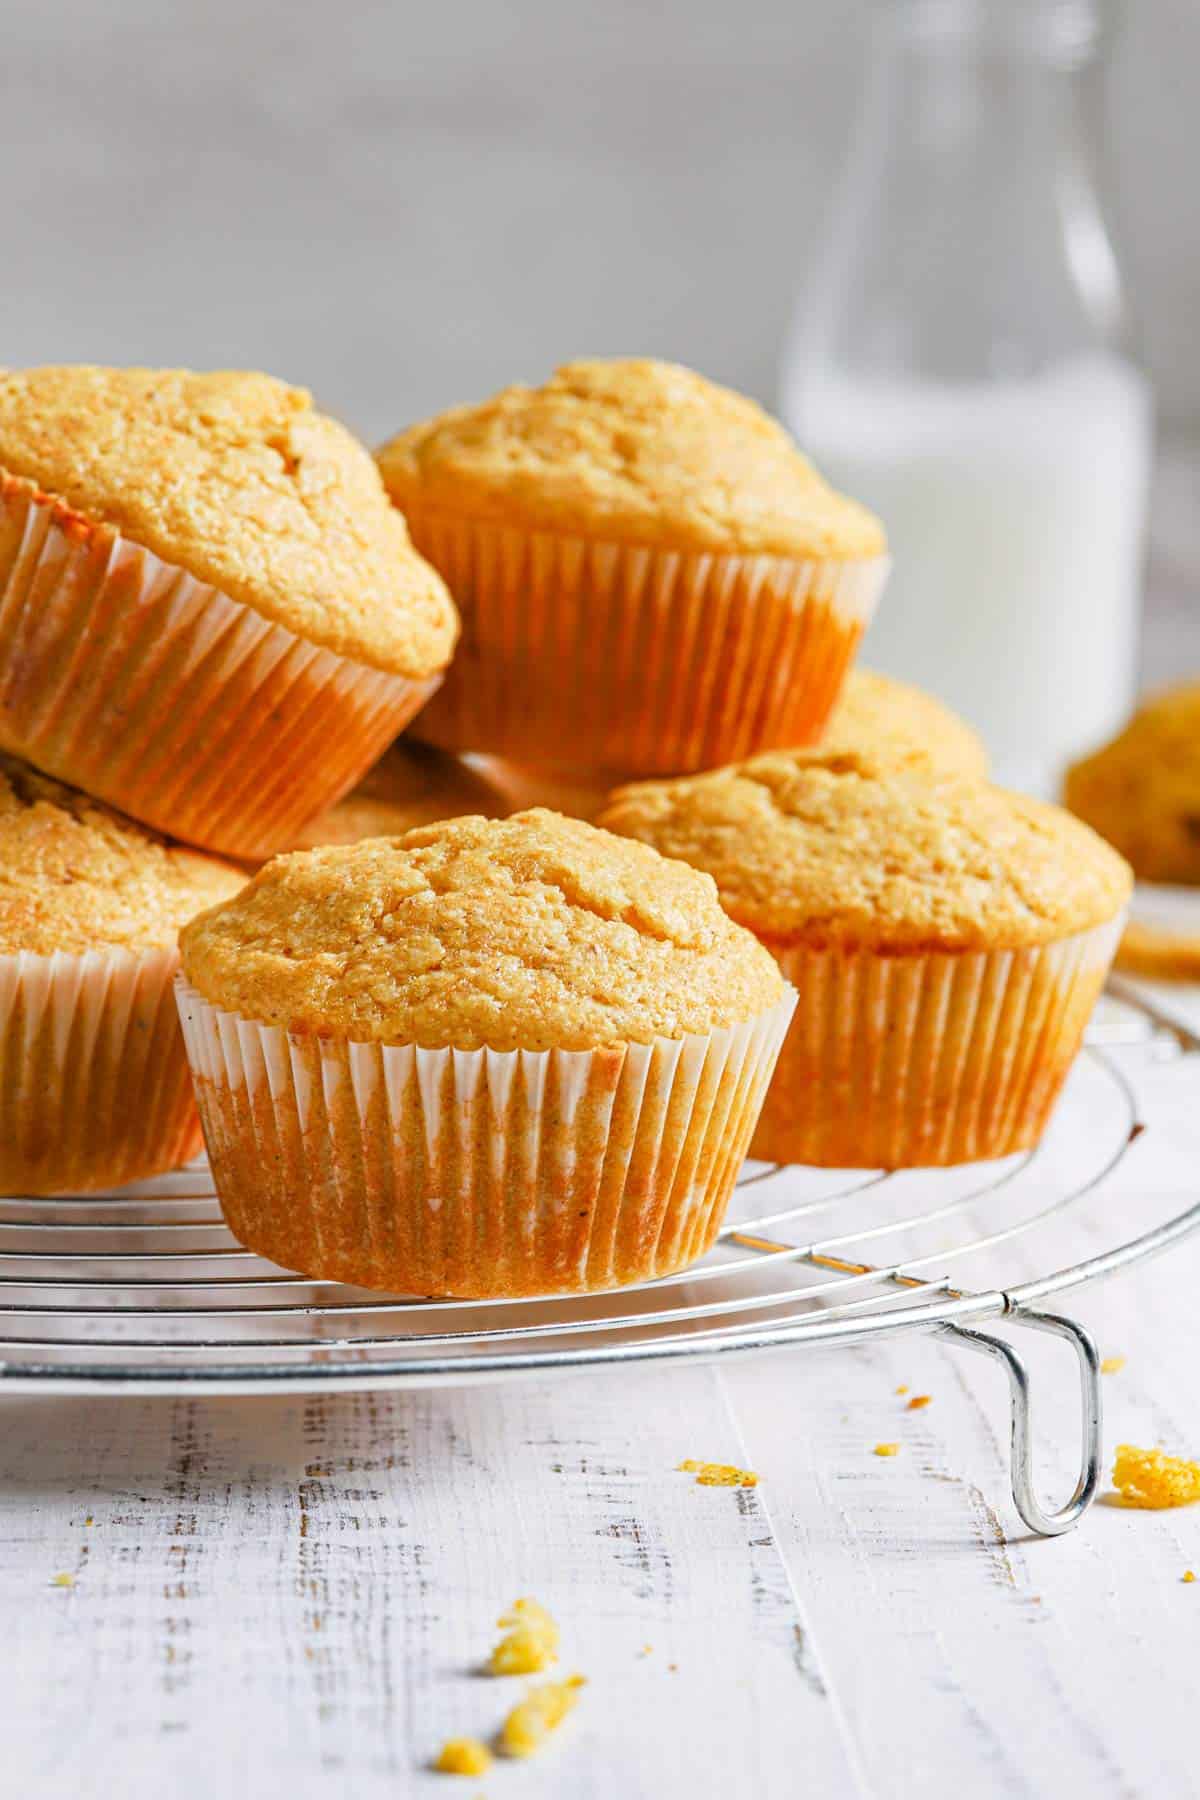 A close up of a pile of cornbread muffins on a wire rack with a jug of milk in the back right.